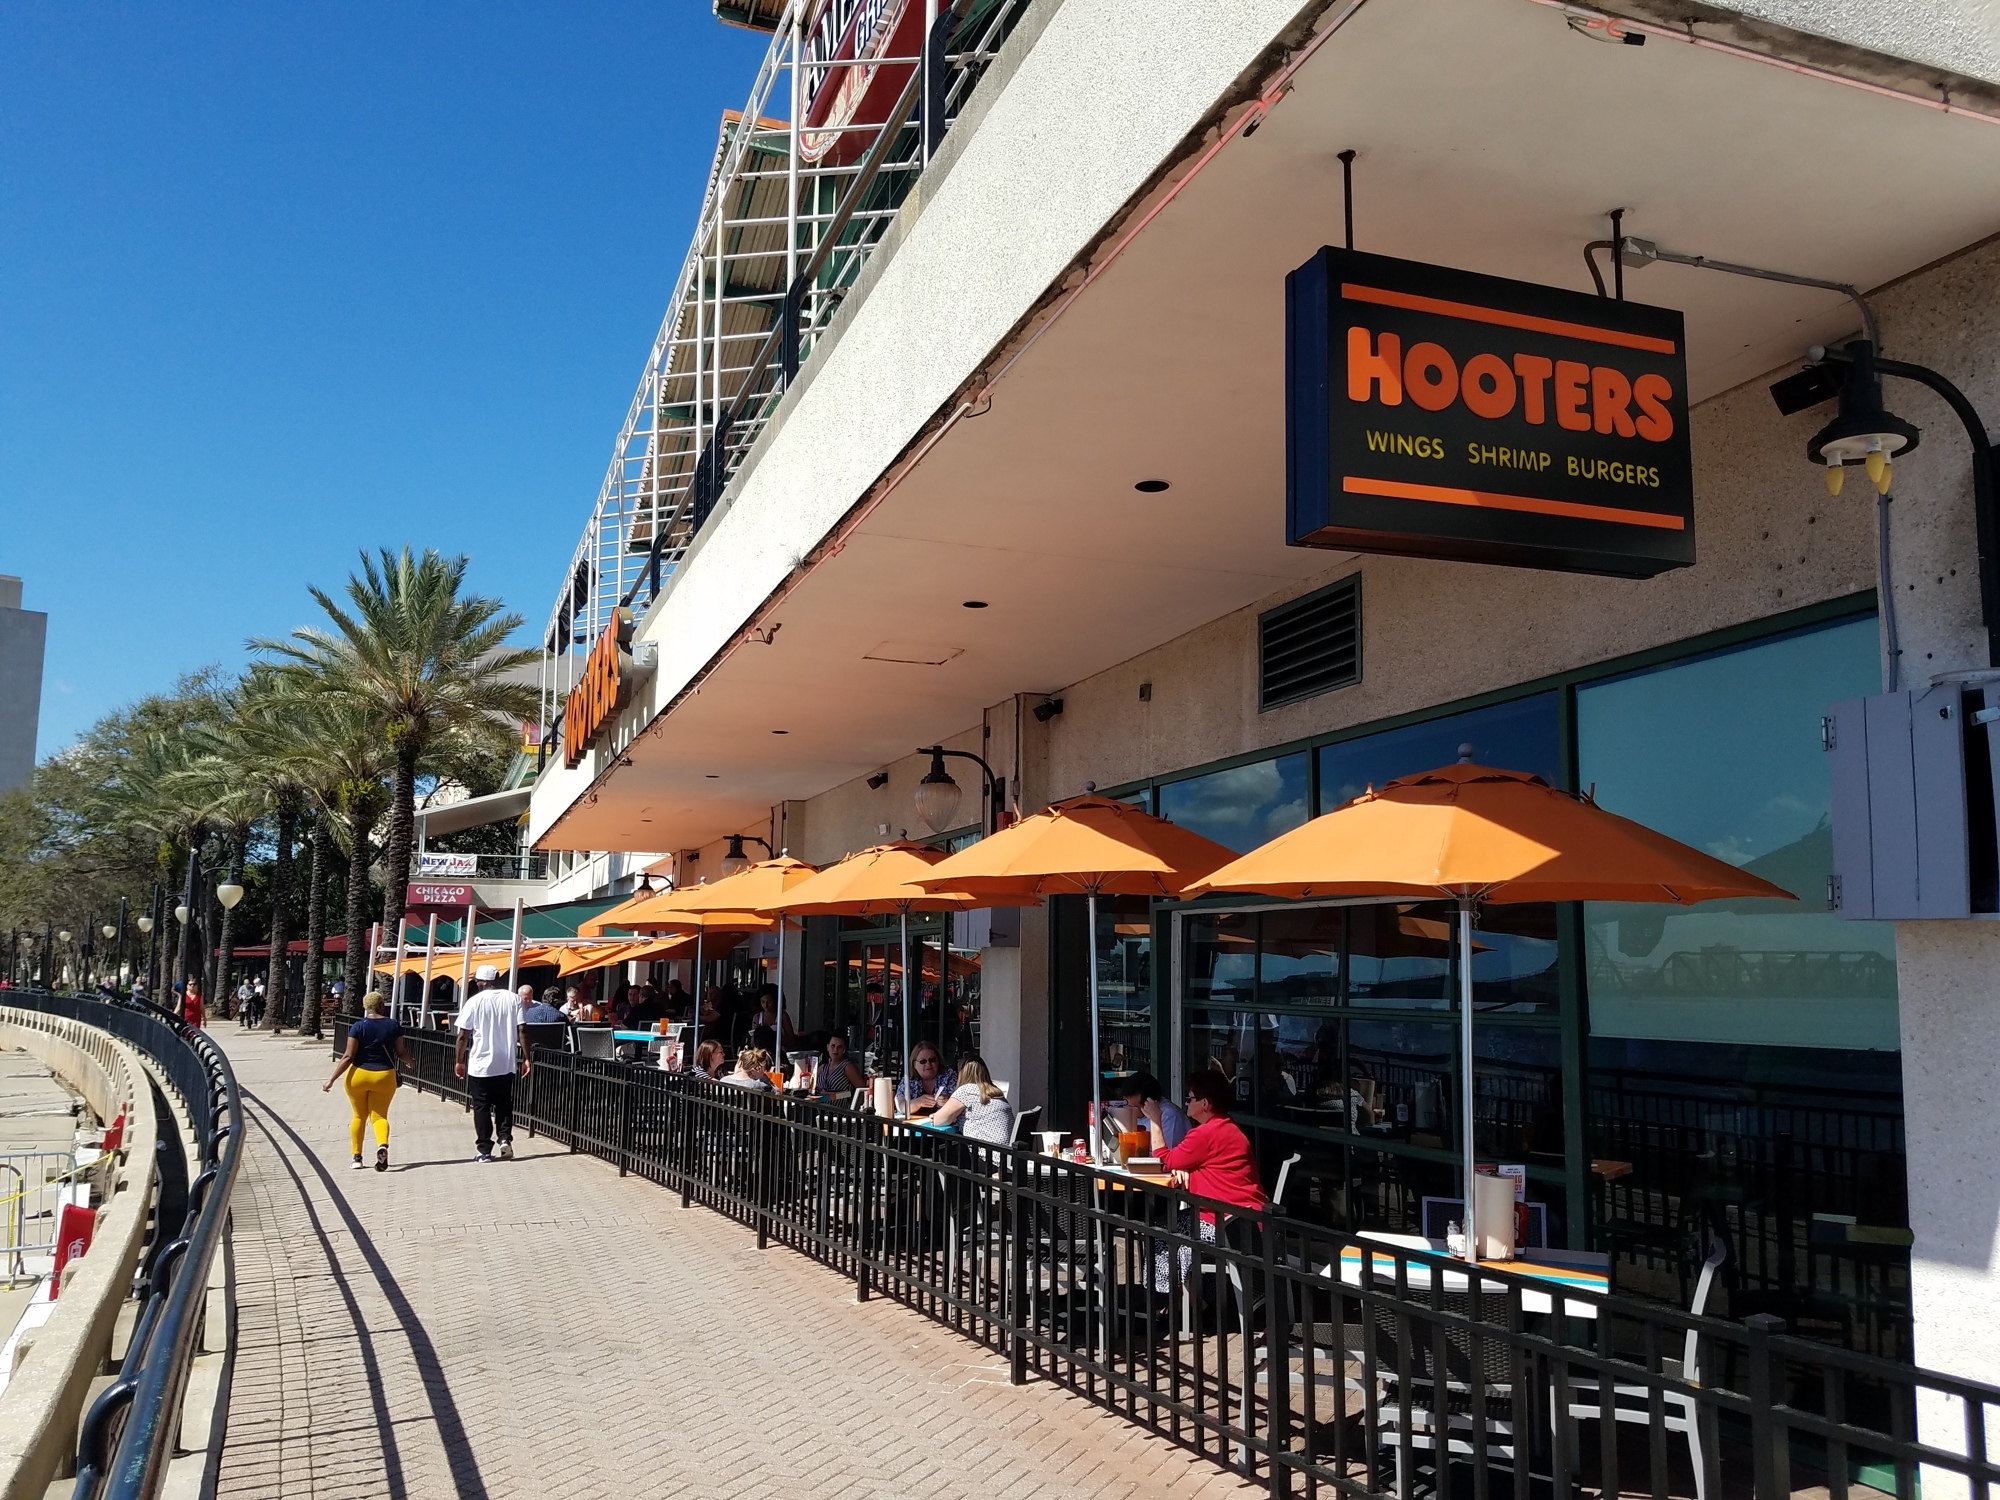 Hooters restaurant will vacate theLanding no later than Oct. 29